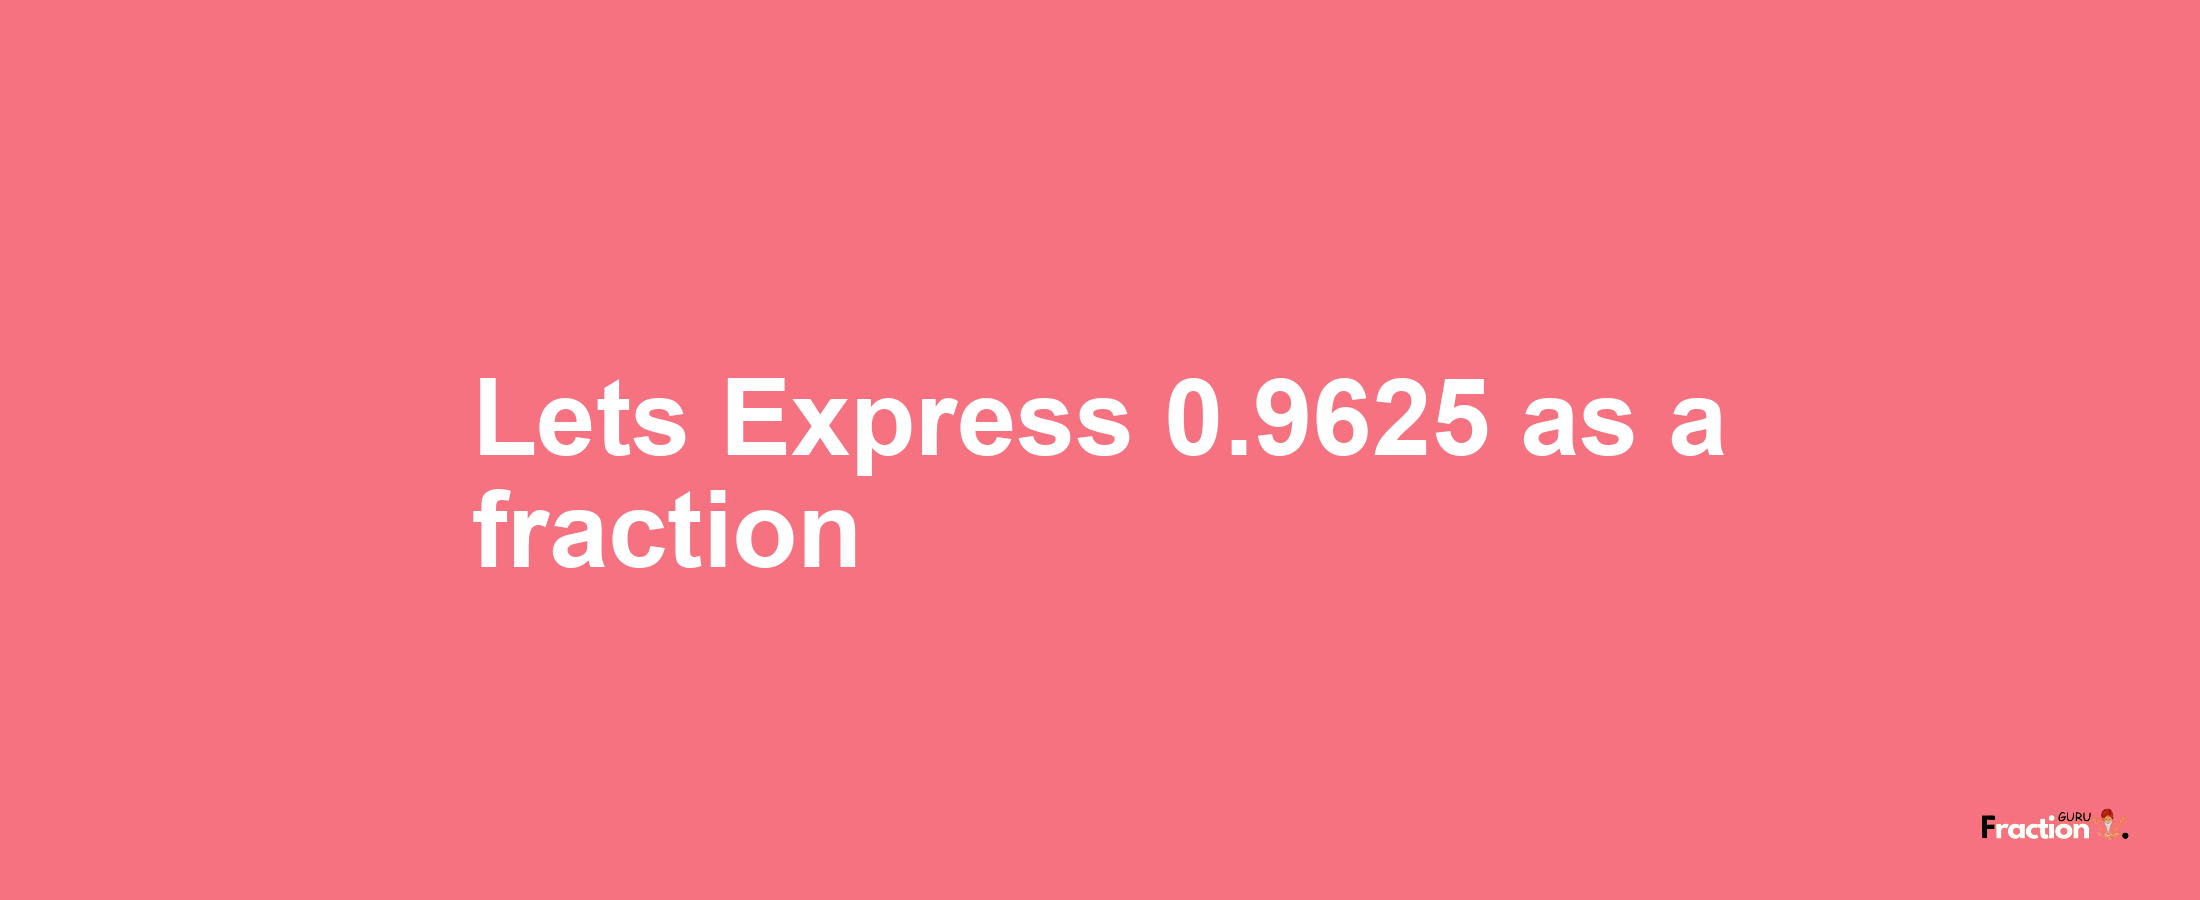 Lets Express 0.9625 as afraction